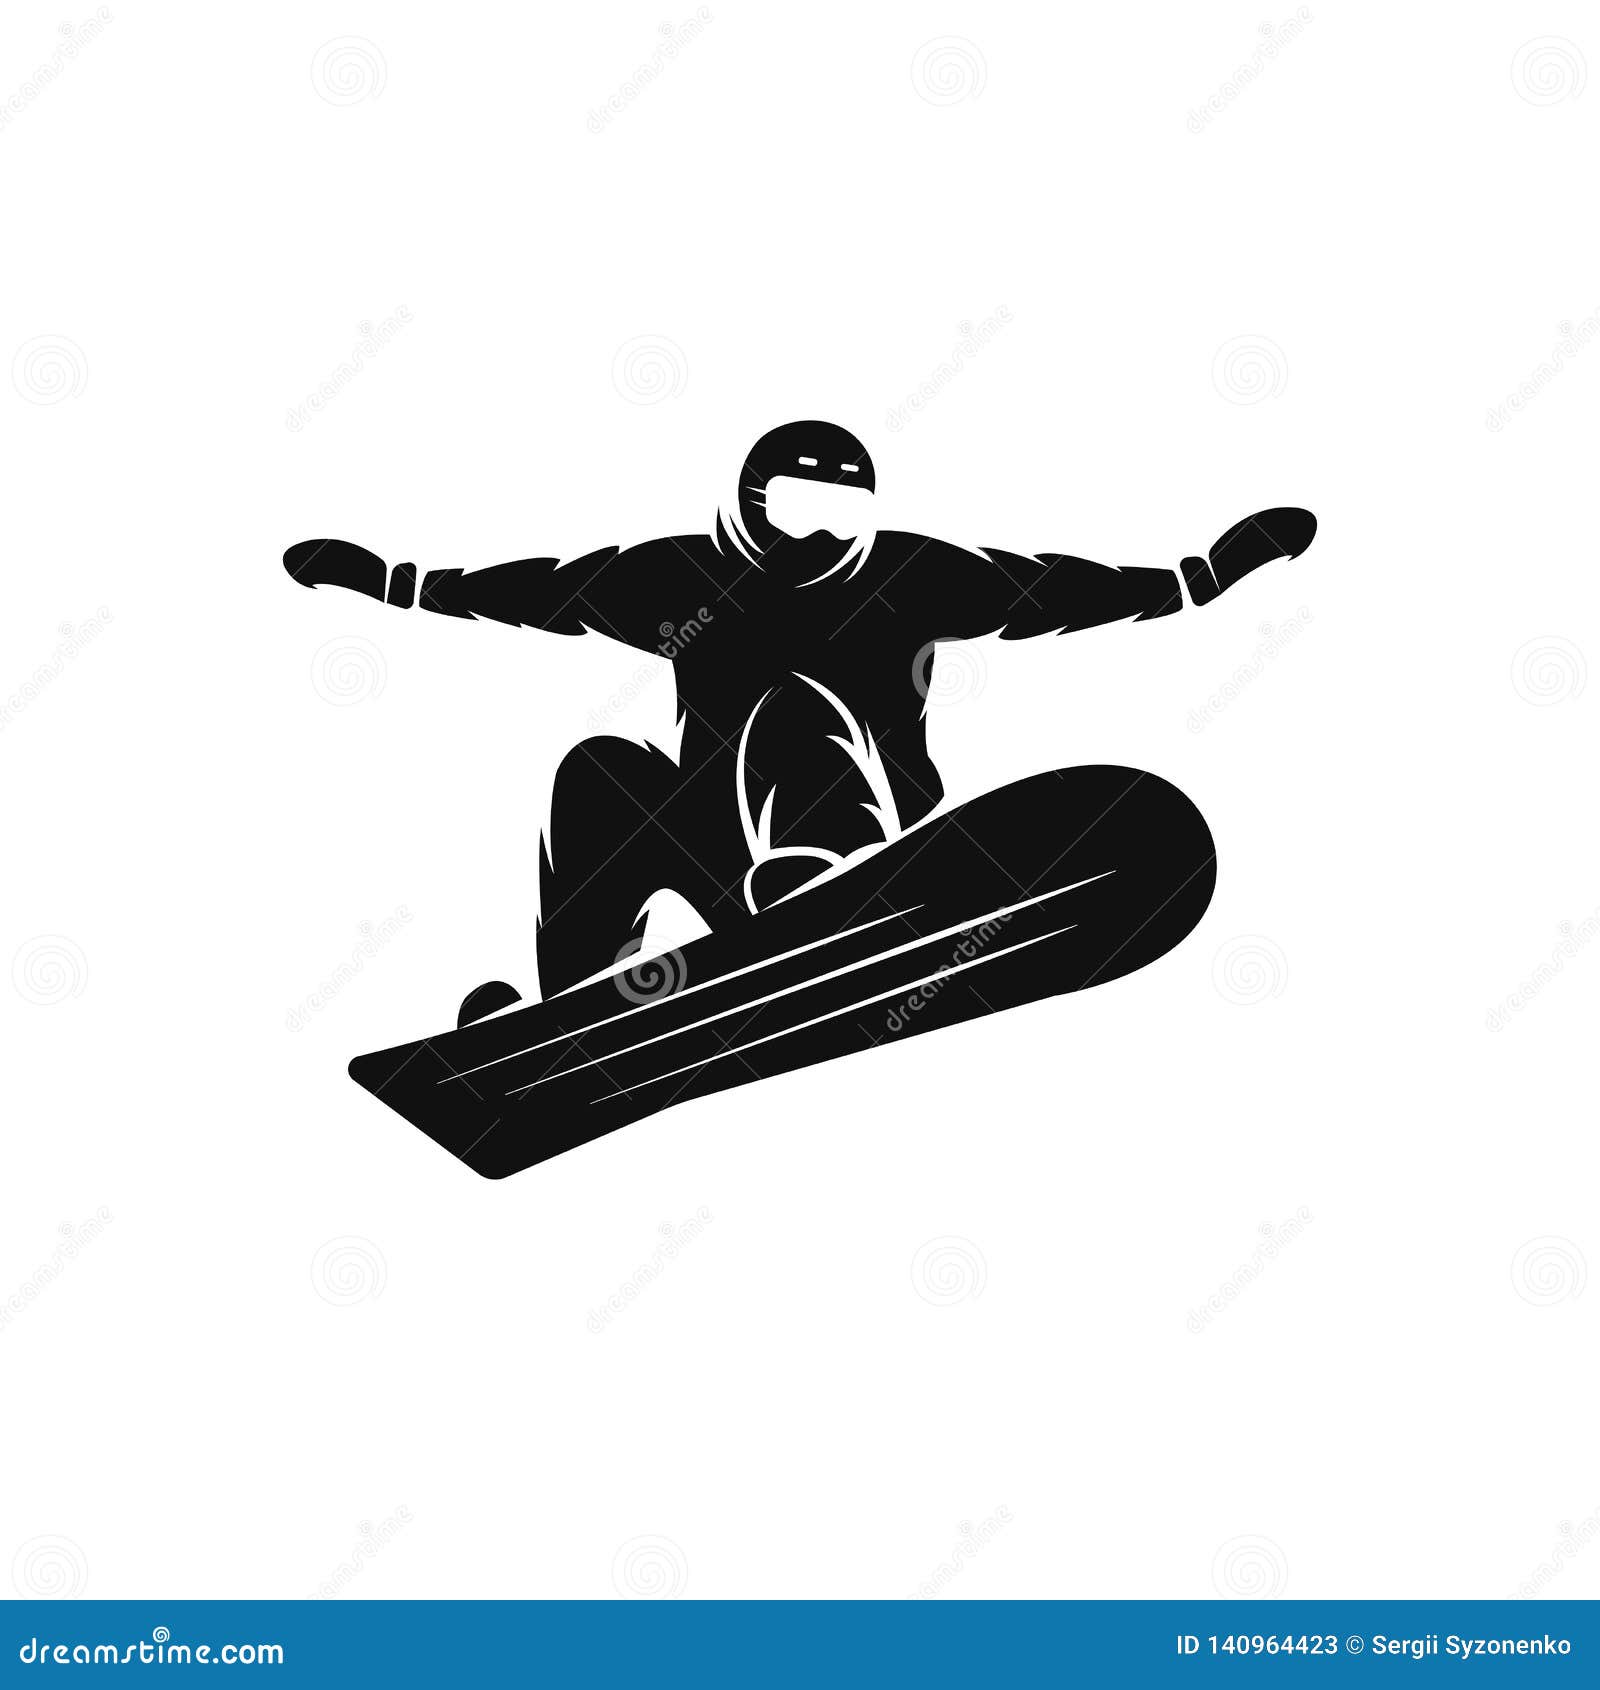 Afhankelijk Gronden Geurloos Silhouette of a Snowboarder on the Snowboard Free Rider Jumping in the Air,  Extreme Snowboarding Sport Logo Mockup Stock Vector - Illustration of  lifestyle, fall: 140964423